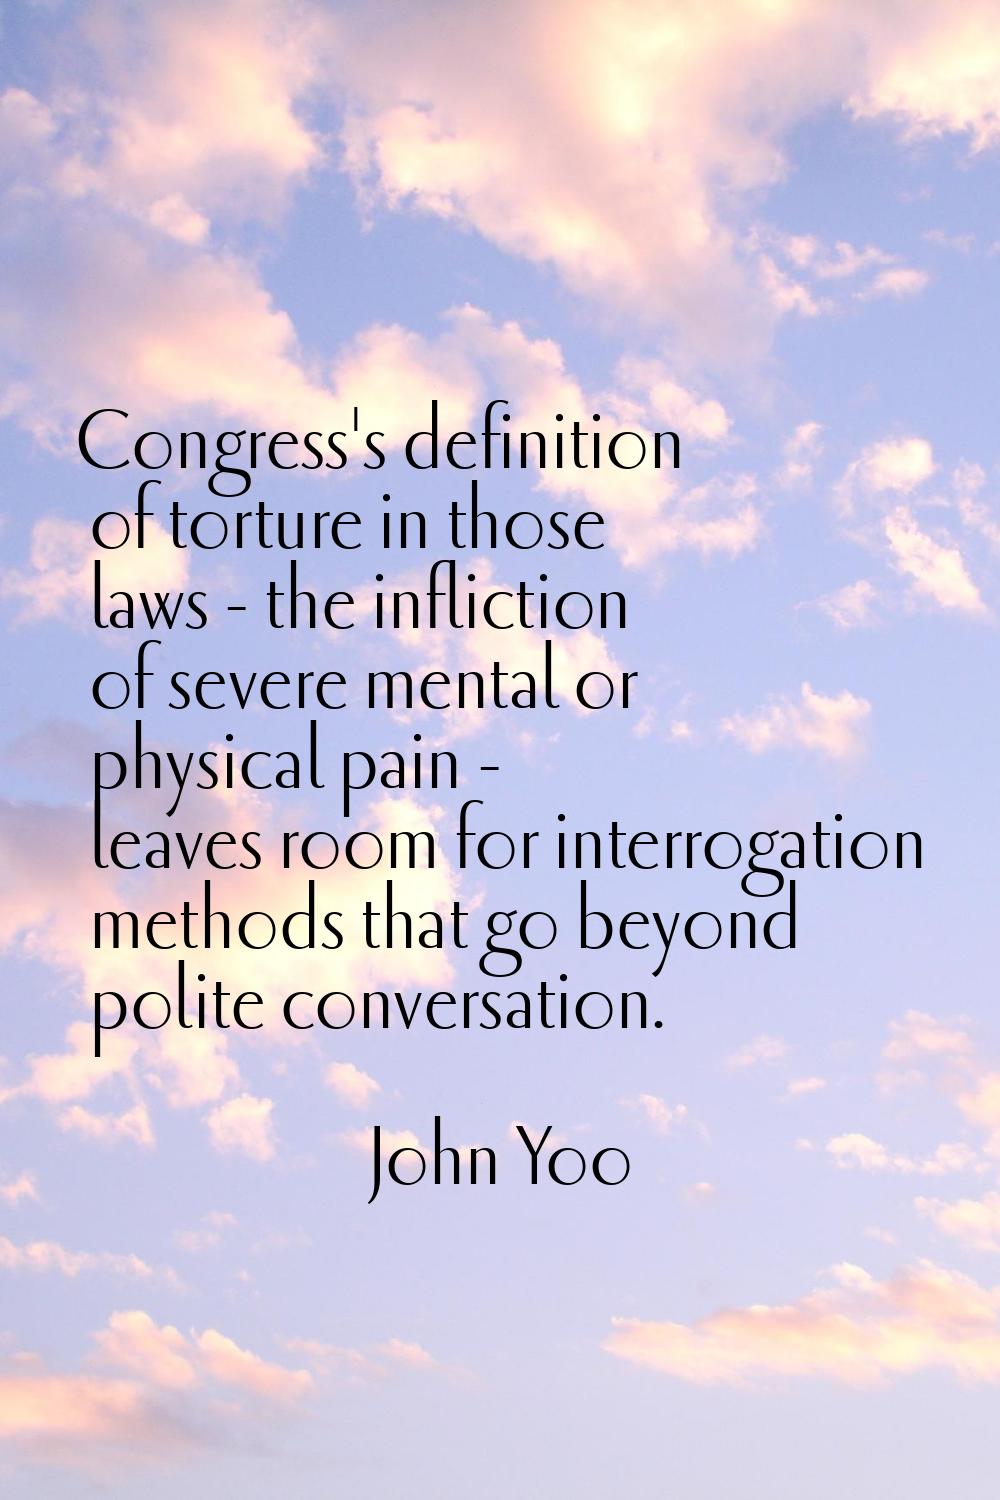 Congress's definition of torture in those laws - the infliction of severe mental or physical pain -